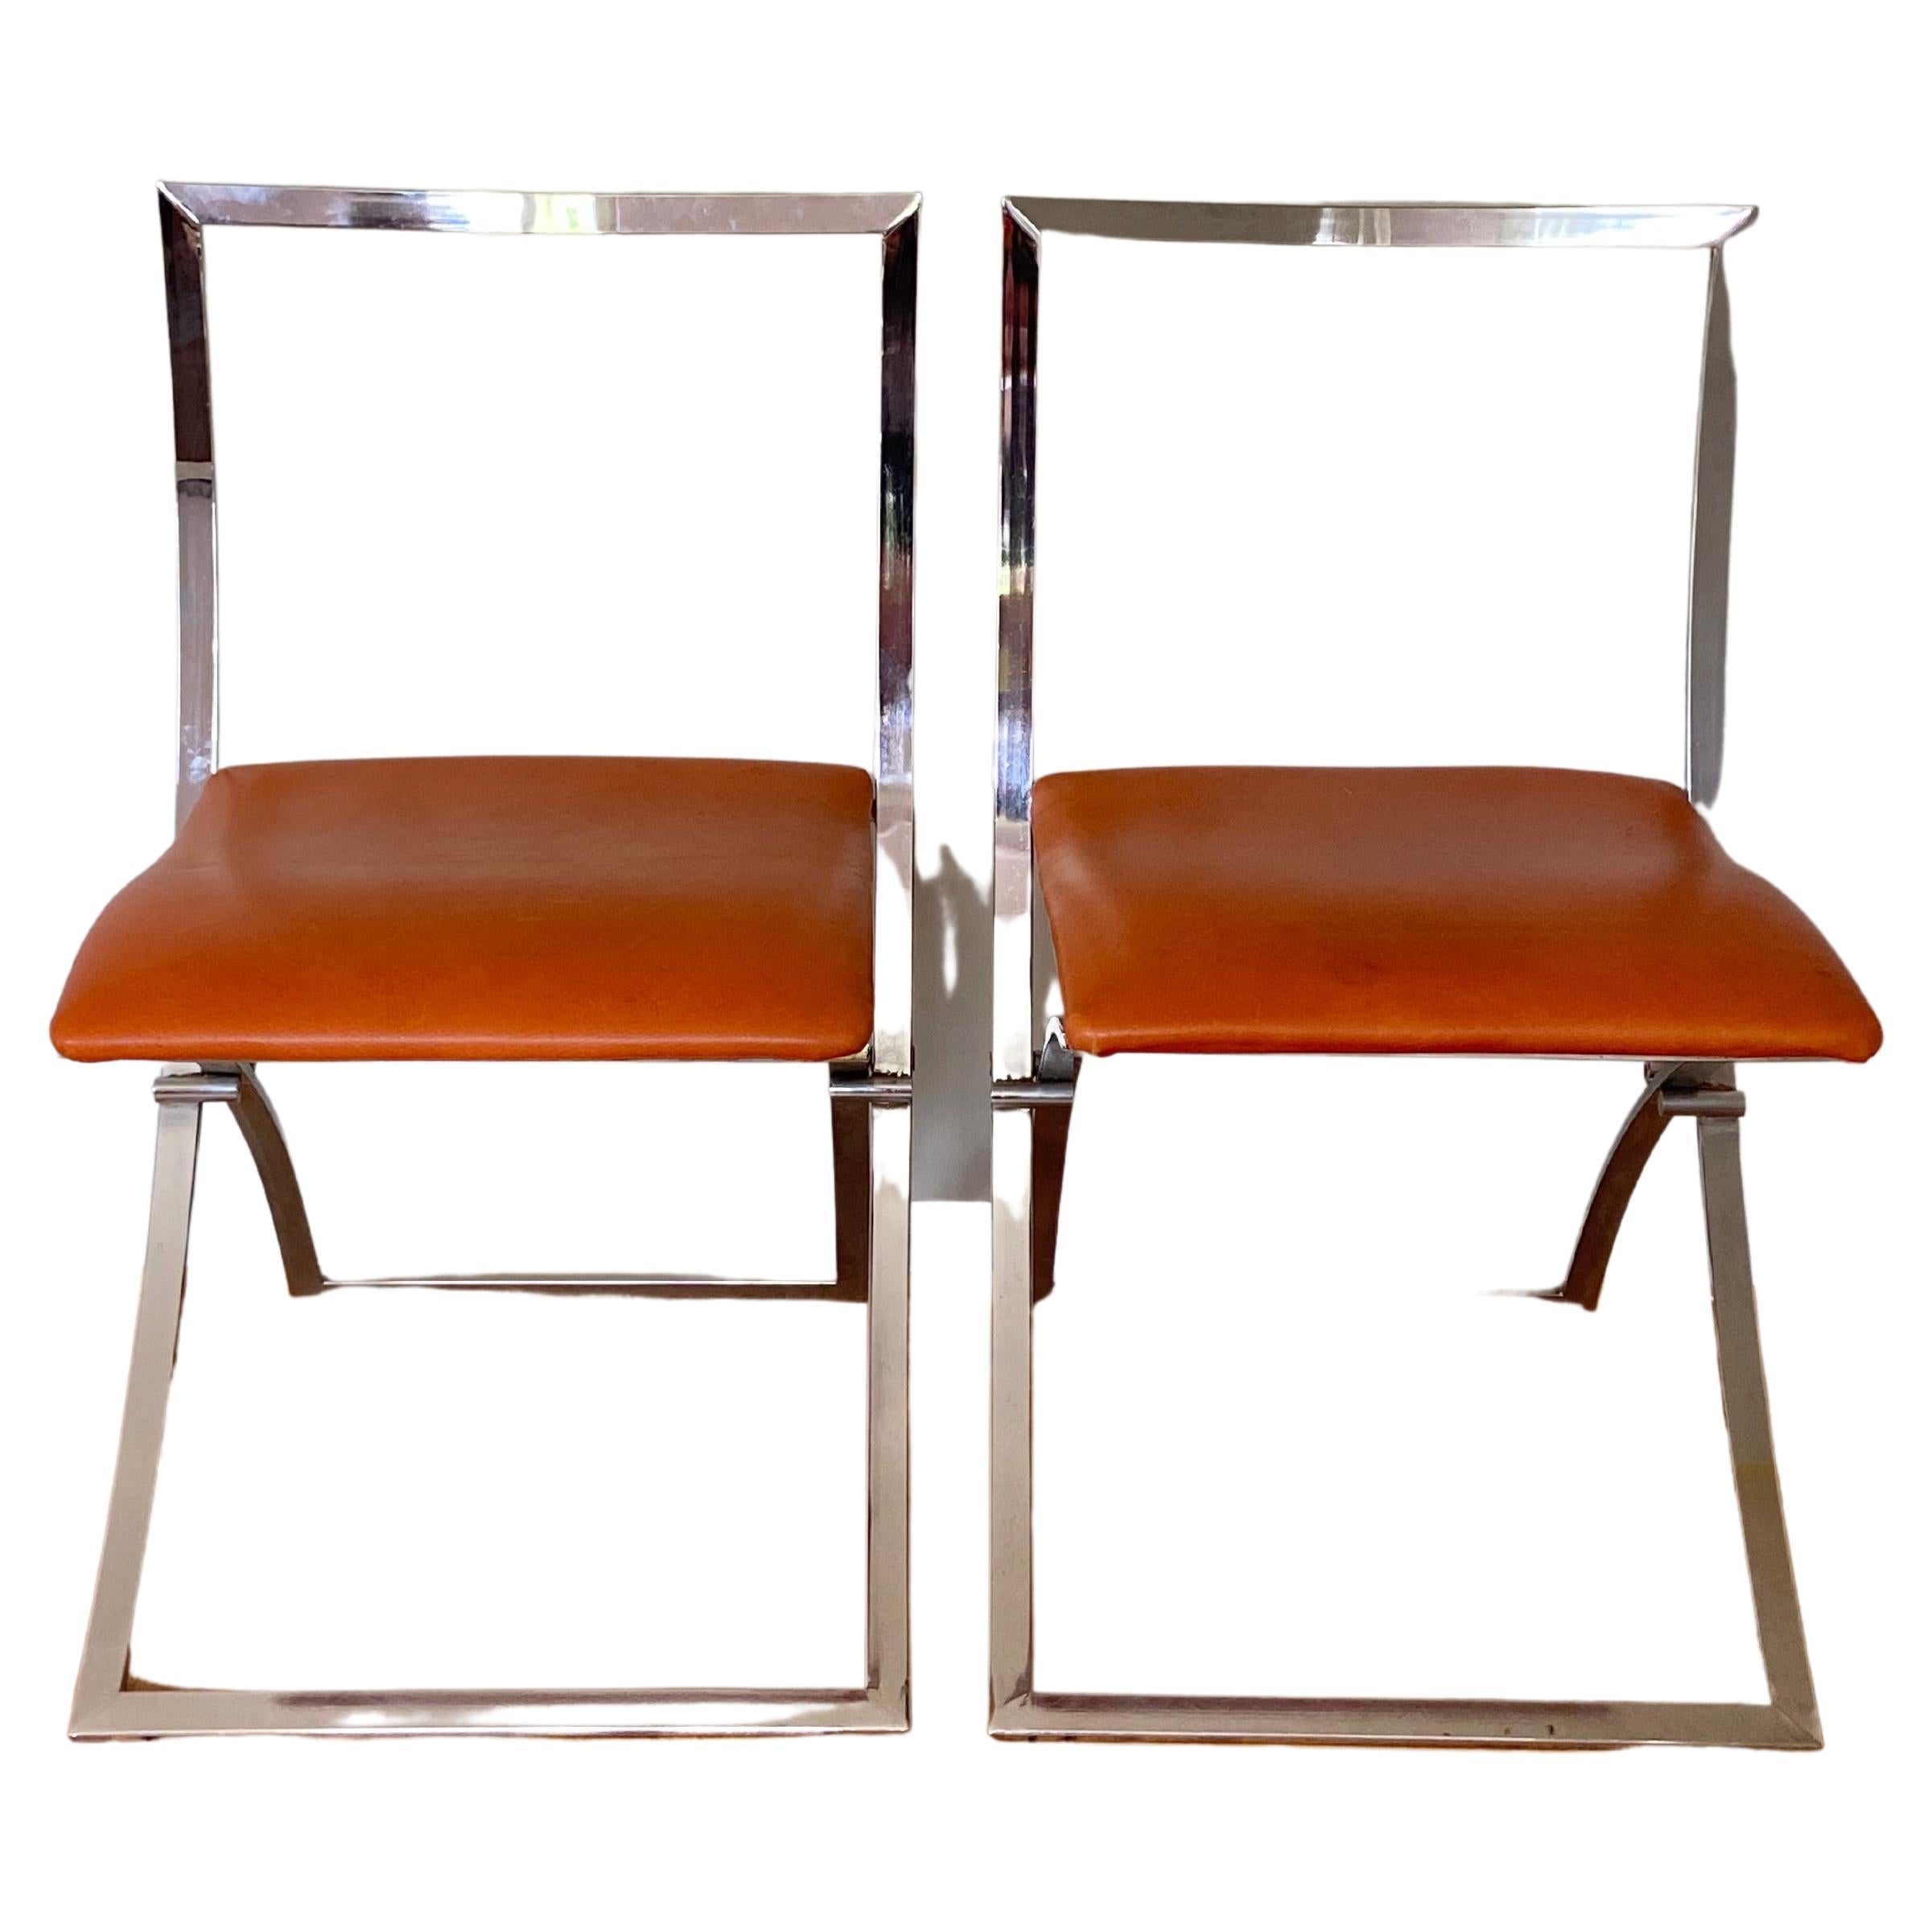 Set of two Marcello Cuneo Luisa Chairs for Mobel Italia, 1970s